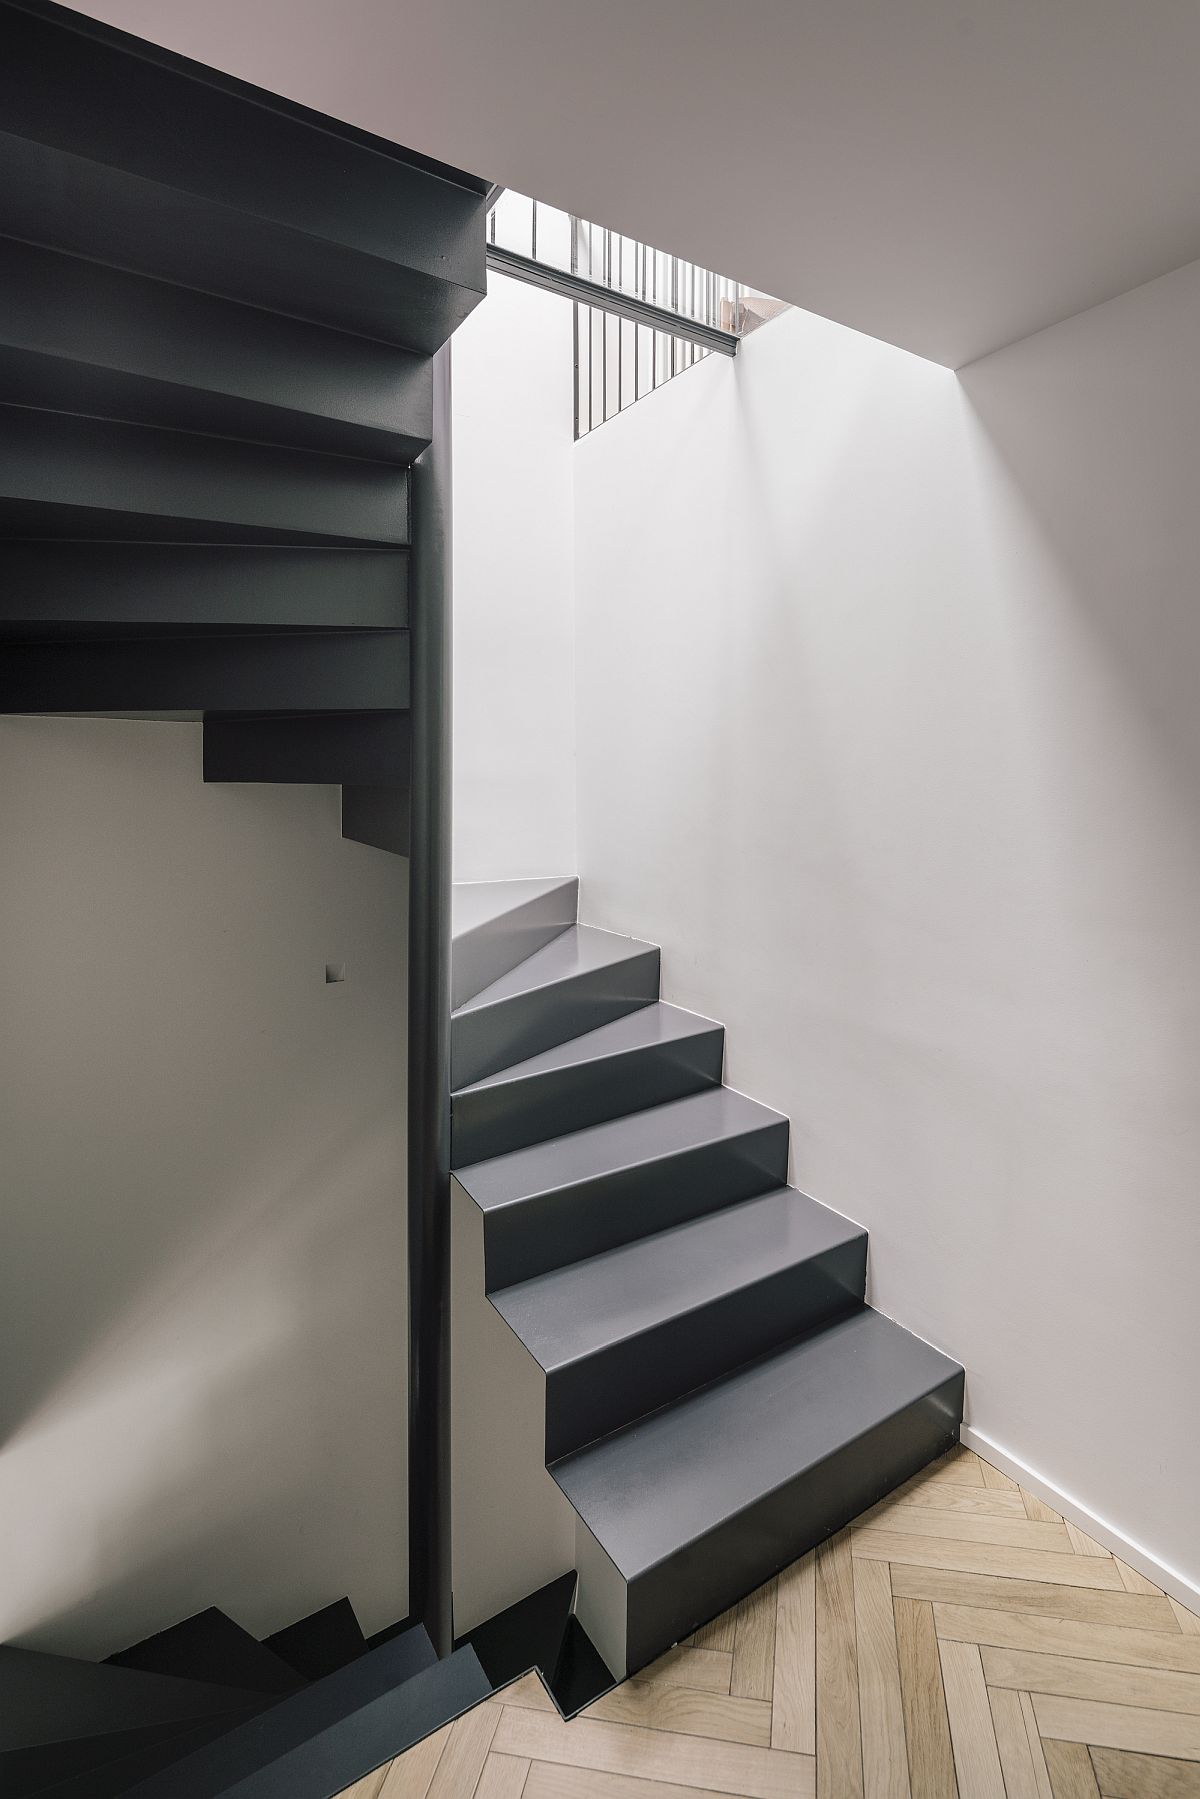 Natural-light-illuminates-the-staircase-and-different-levels-inside-the-house-20820